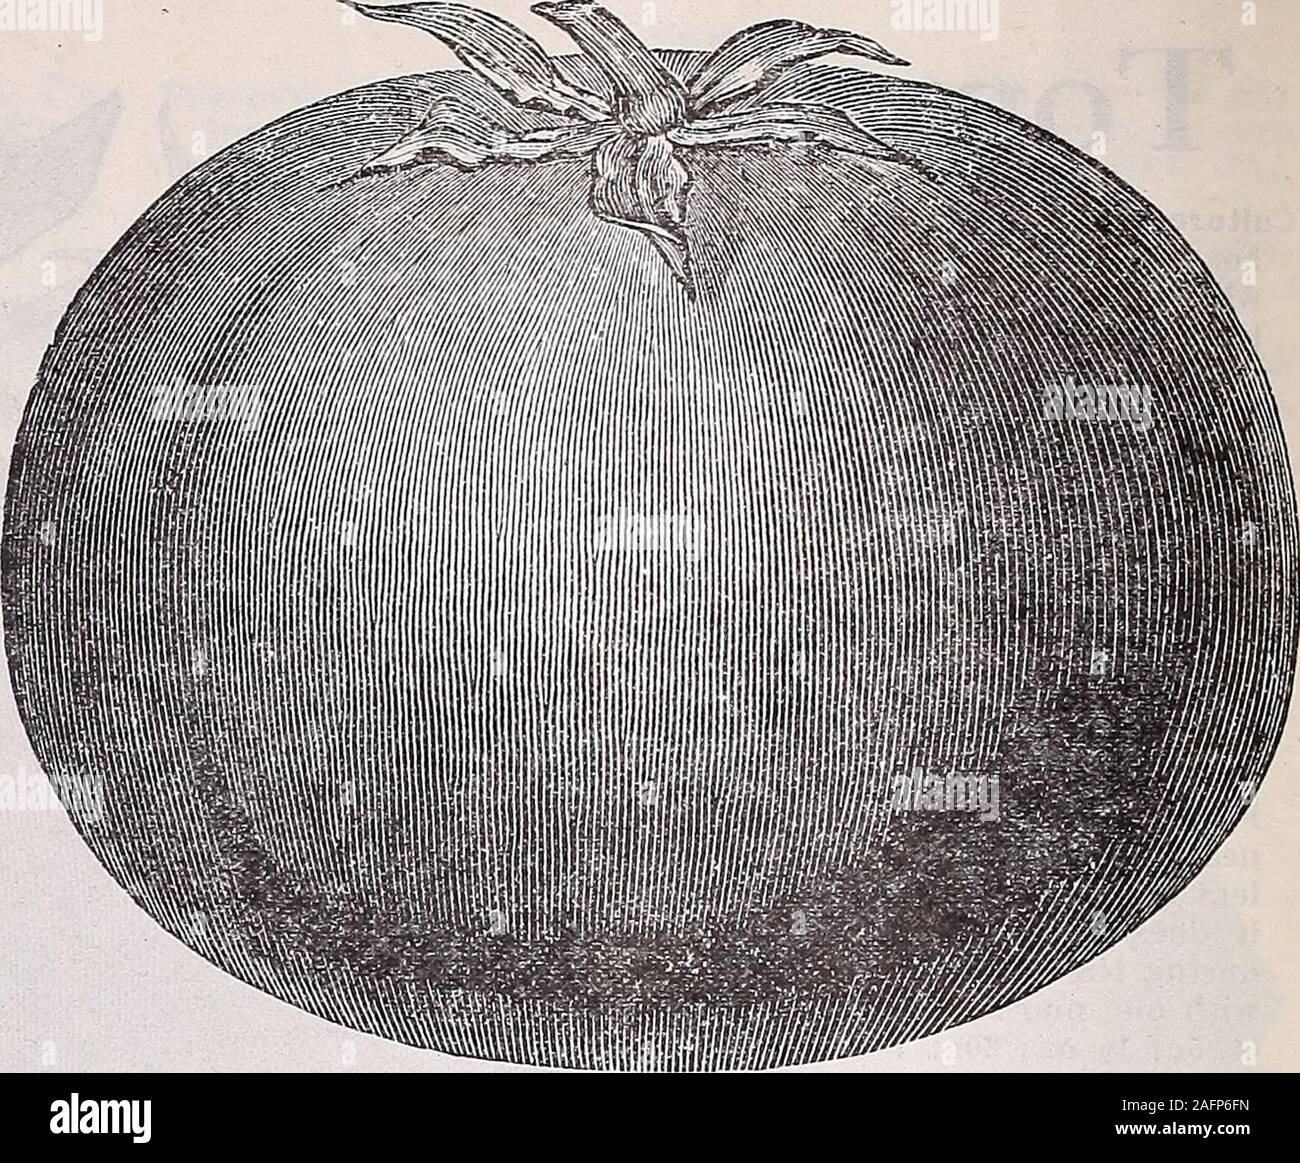 . 1915 annual catalogue. Stone Tomato. Stone—A large red tomato and one that can be recommendedgenerally for all purposes, whether home use, market, orcanning. It is especially desirable for late planting. As thename indicates, it is very solid and firm; large size, ripensevenly, and is a good keeper. Pkt., 5c; Yi oz., 15c; 1 oz.,25c; 2 oz., 40c; *4 lb., 70c, parcel post paid. Baltimore Queen—Color a rich glossy pink; a very heavjrcropper; fruit large, firm and heavy. It averages 8 to 10fine tomatoes in a cluster; ripens evenly up to stems; not.subject to blight. Pkt., 5c; Yi oz., 15c; 1 oz., Stock Photo